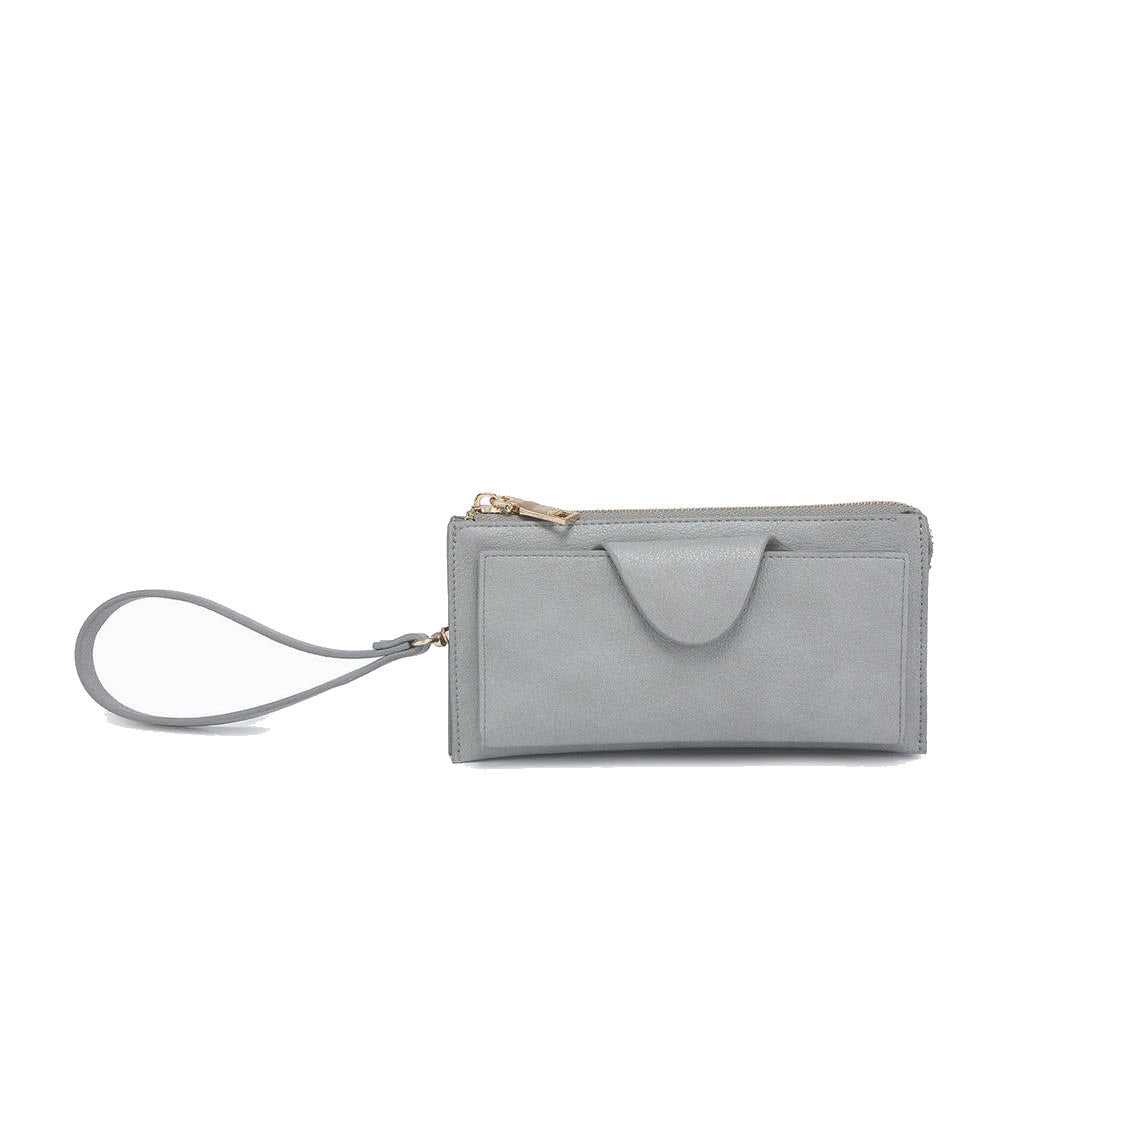 A stylish JEN & CO KYLA WALLET DUSTY BLUE wristlet wallet with a zipper and external pocket, centered against a white background.